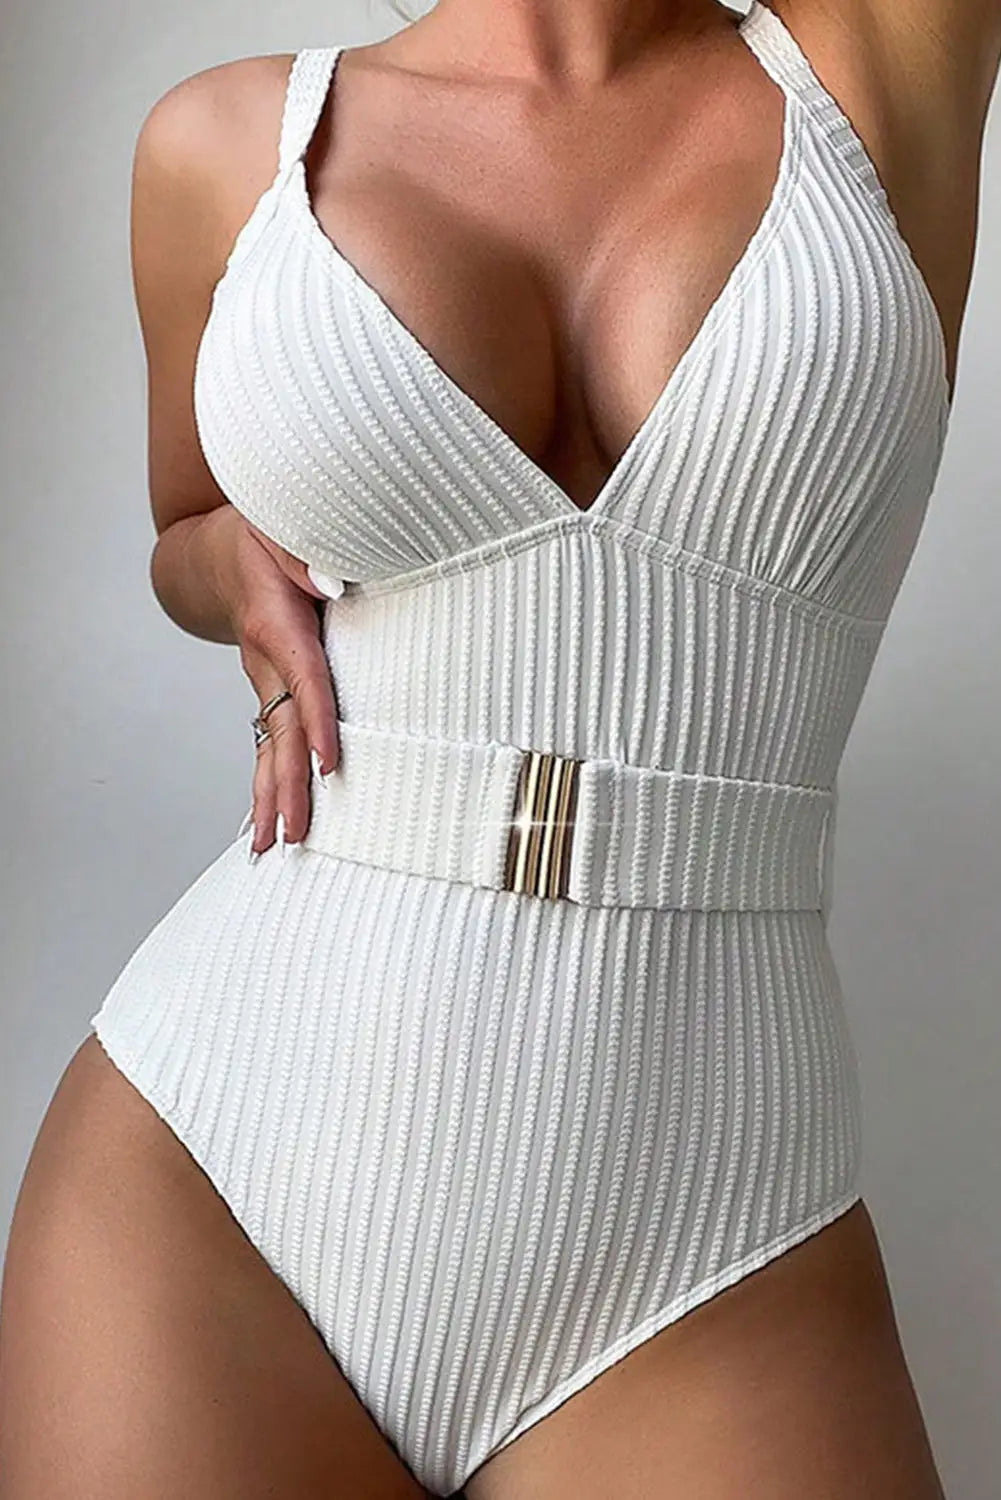 White ribbed one piece swimsuit - s / 100% polyester - swimsuits